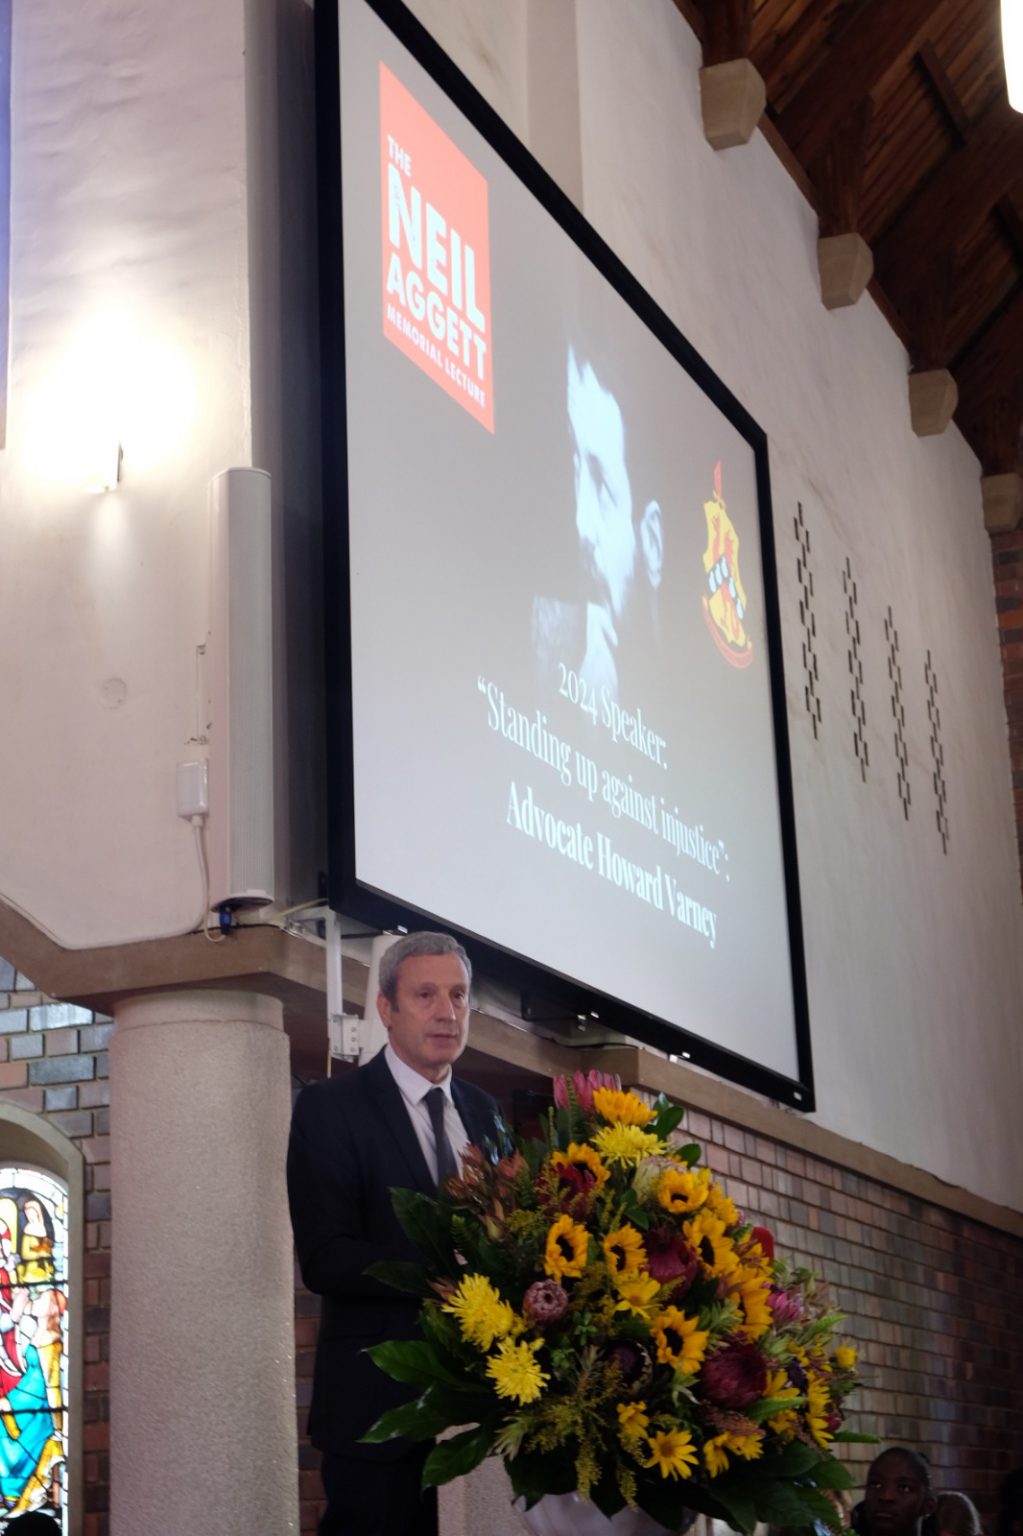 Advocate Howard Varney, guest speaker at the Neil Aggett memorial lecture at Kingswood College, speaking on standing up against injustice. Photo: Rod Amner